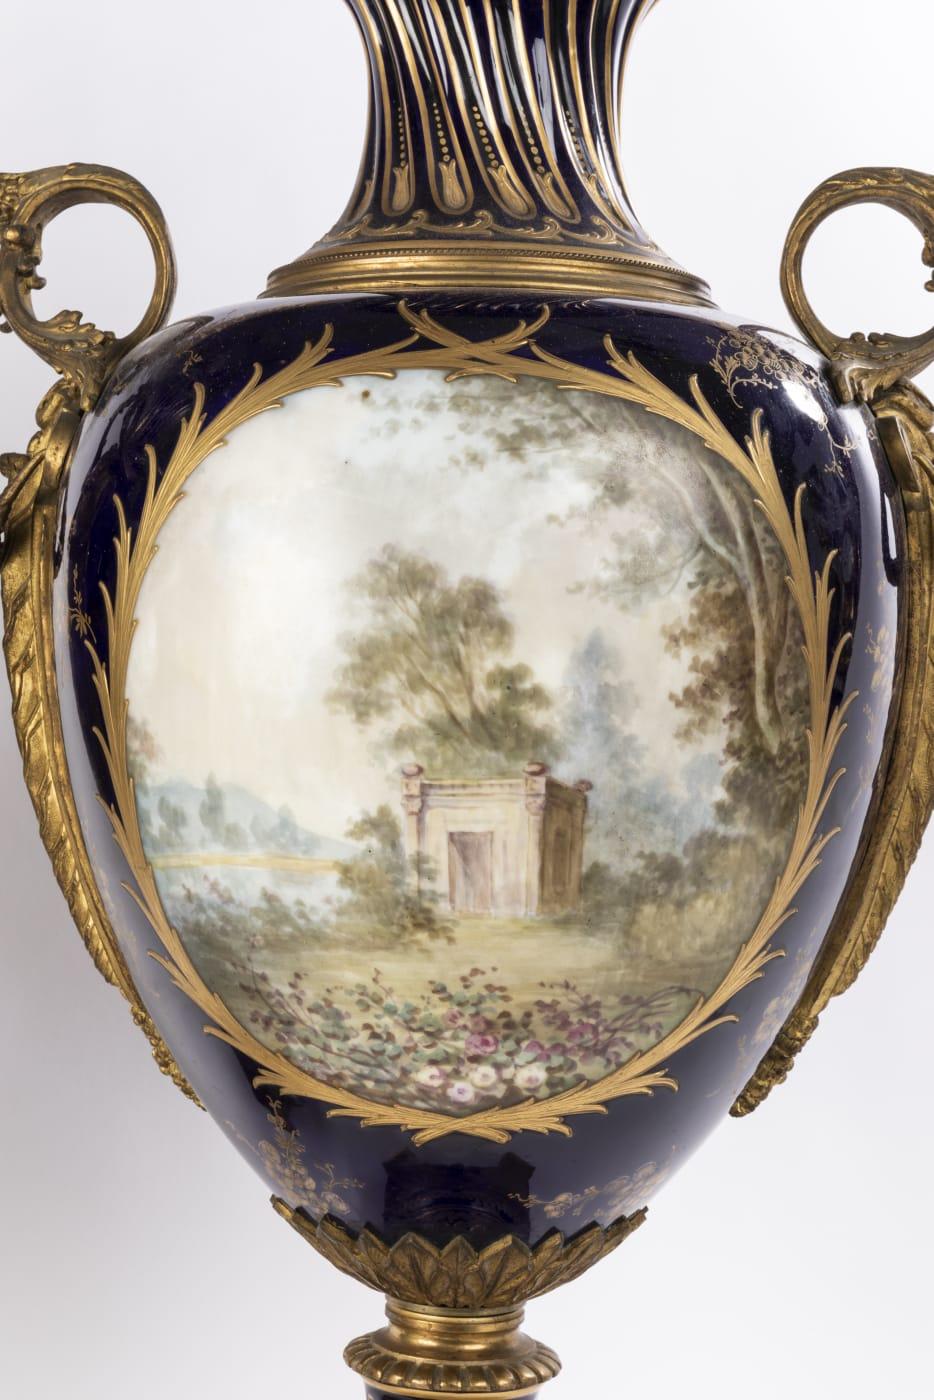 Two large and impressive 19th century French Sevres style porcelain vases have a fascinating dark blue background. Each vase is placed on an octagonal base adorned with intricate designs. The front panel on each is hand painted to represent a